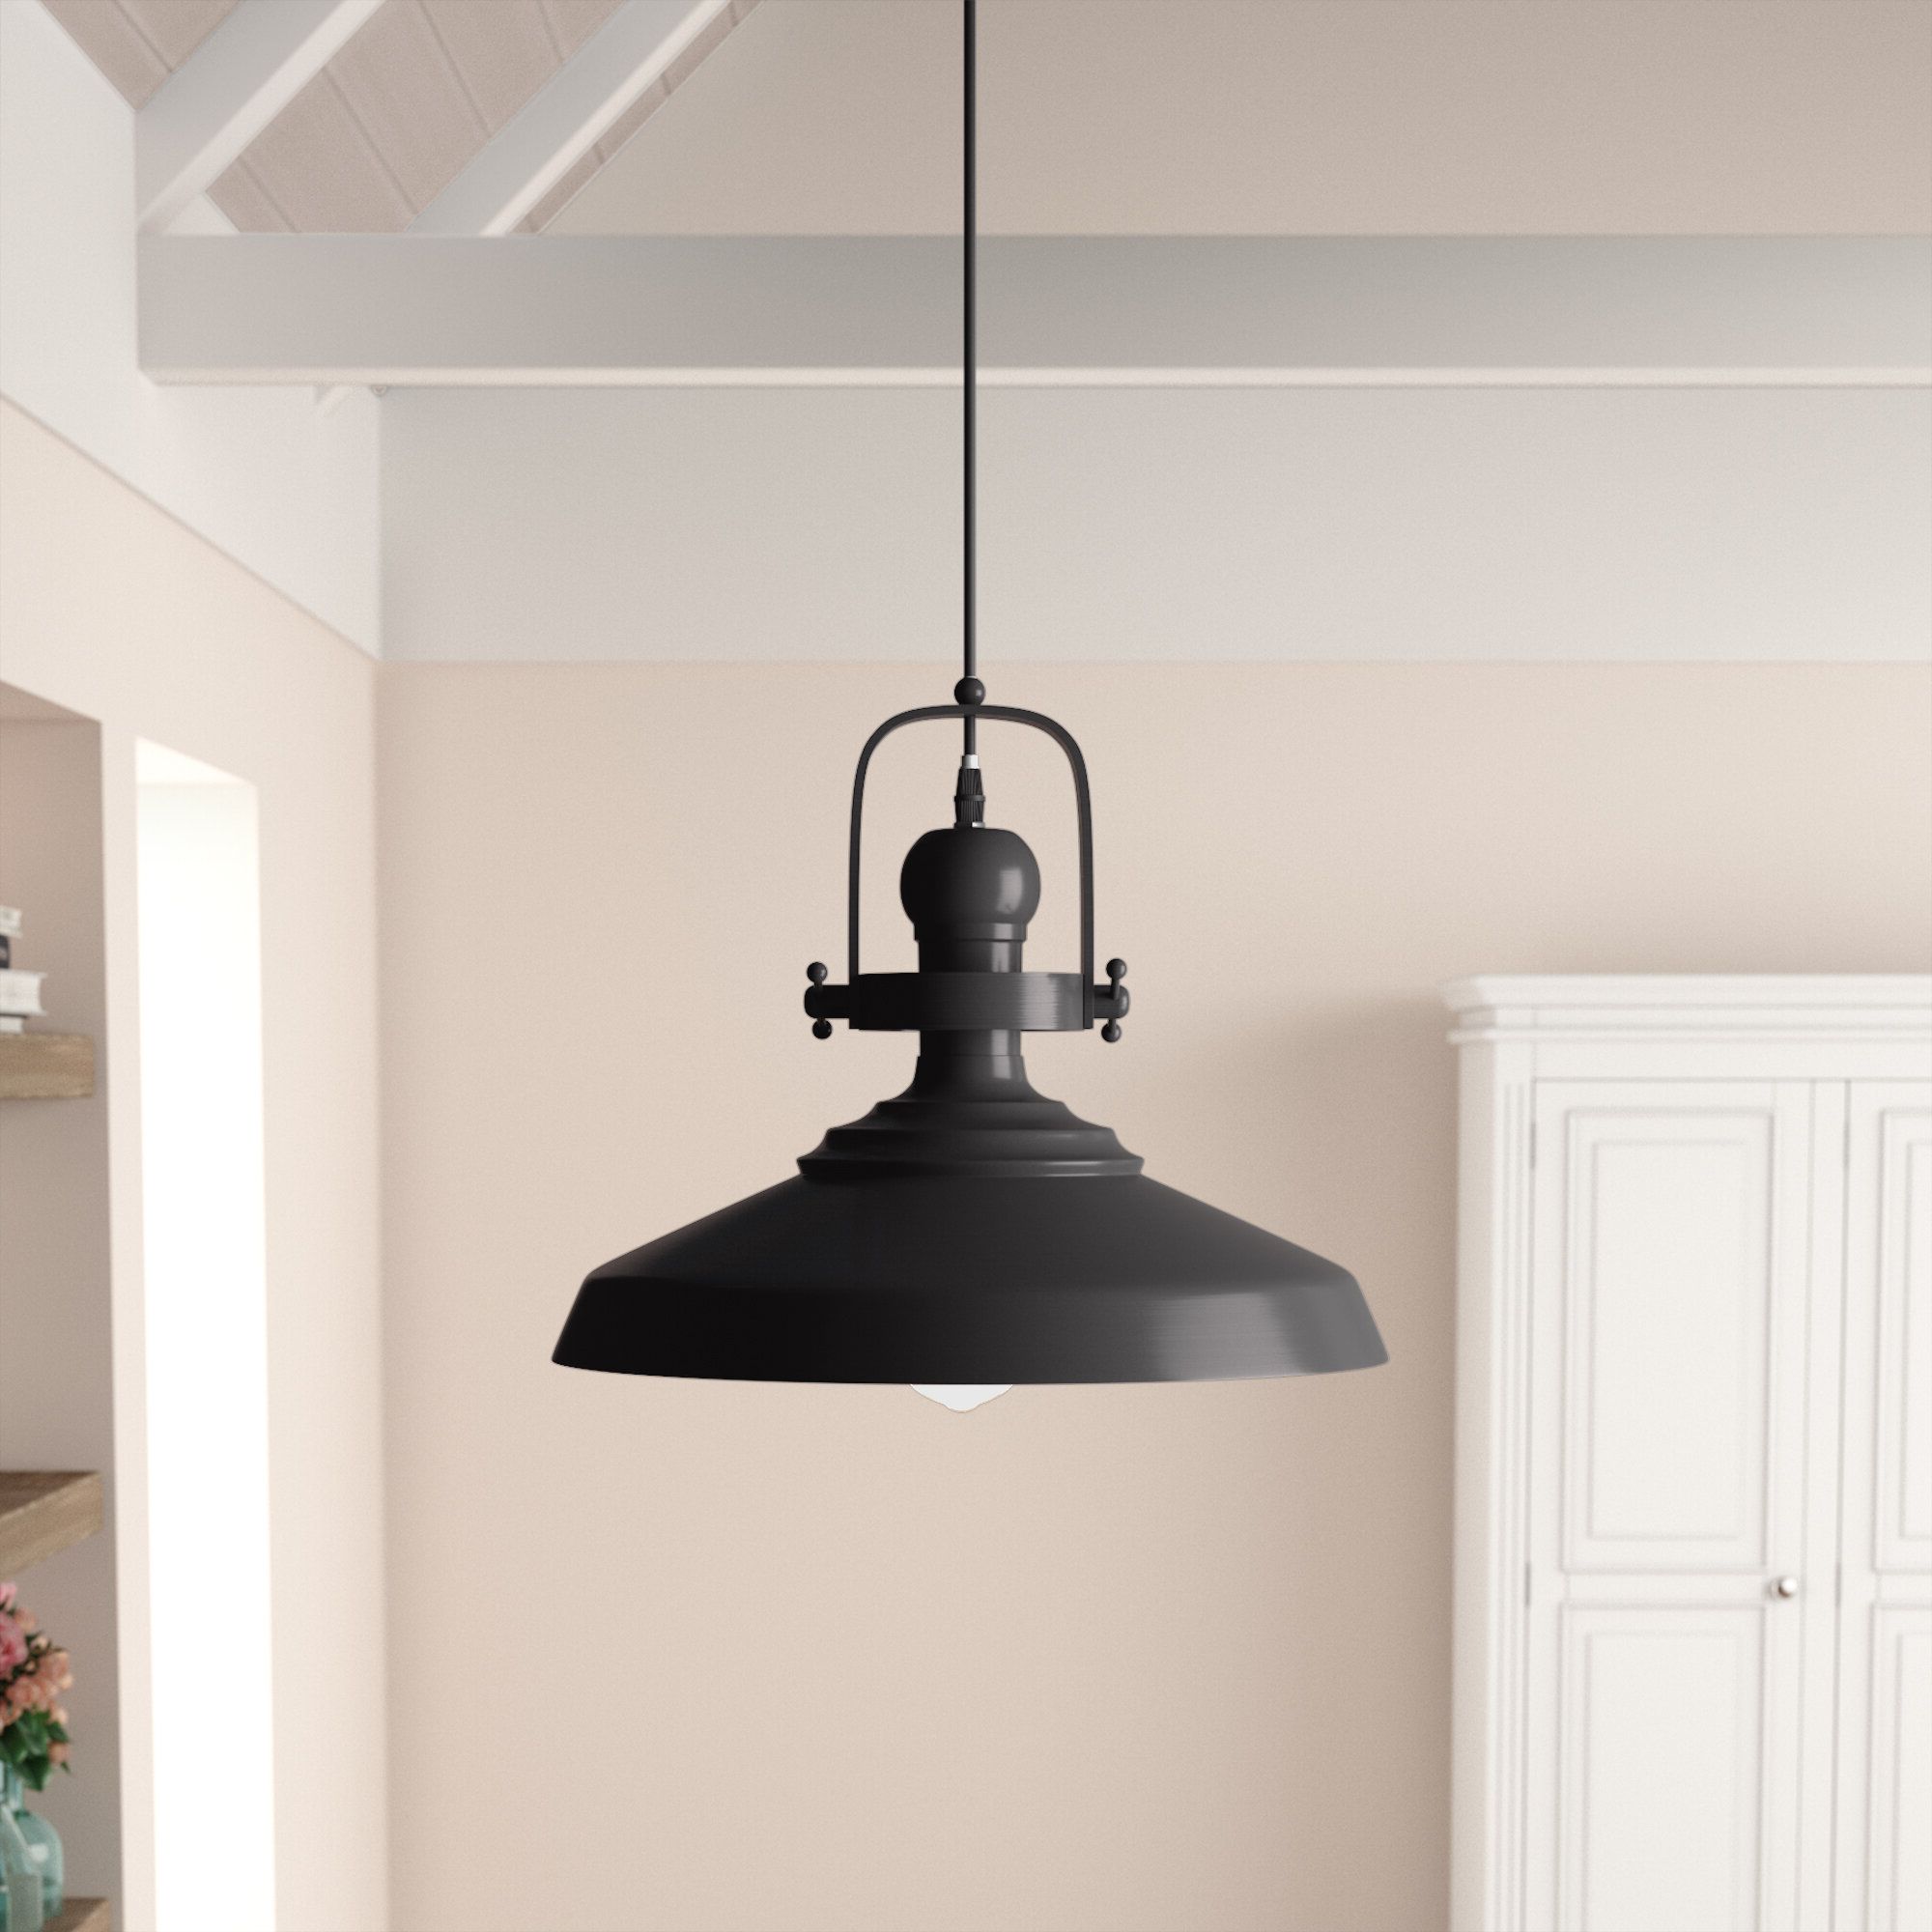 Widely Used Estelle 1 Light Single Dome Pendant Within Priston 1 Light Single Dome Pendants (View 9 of 25)